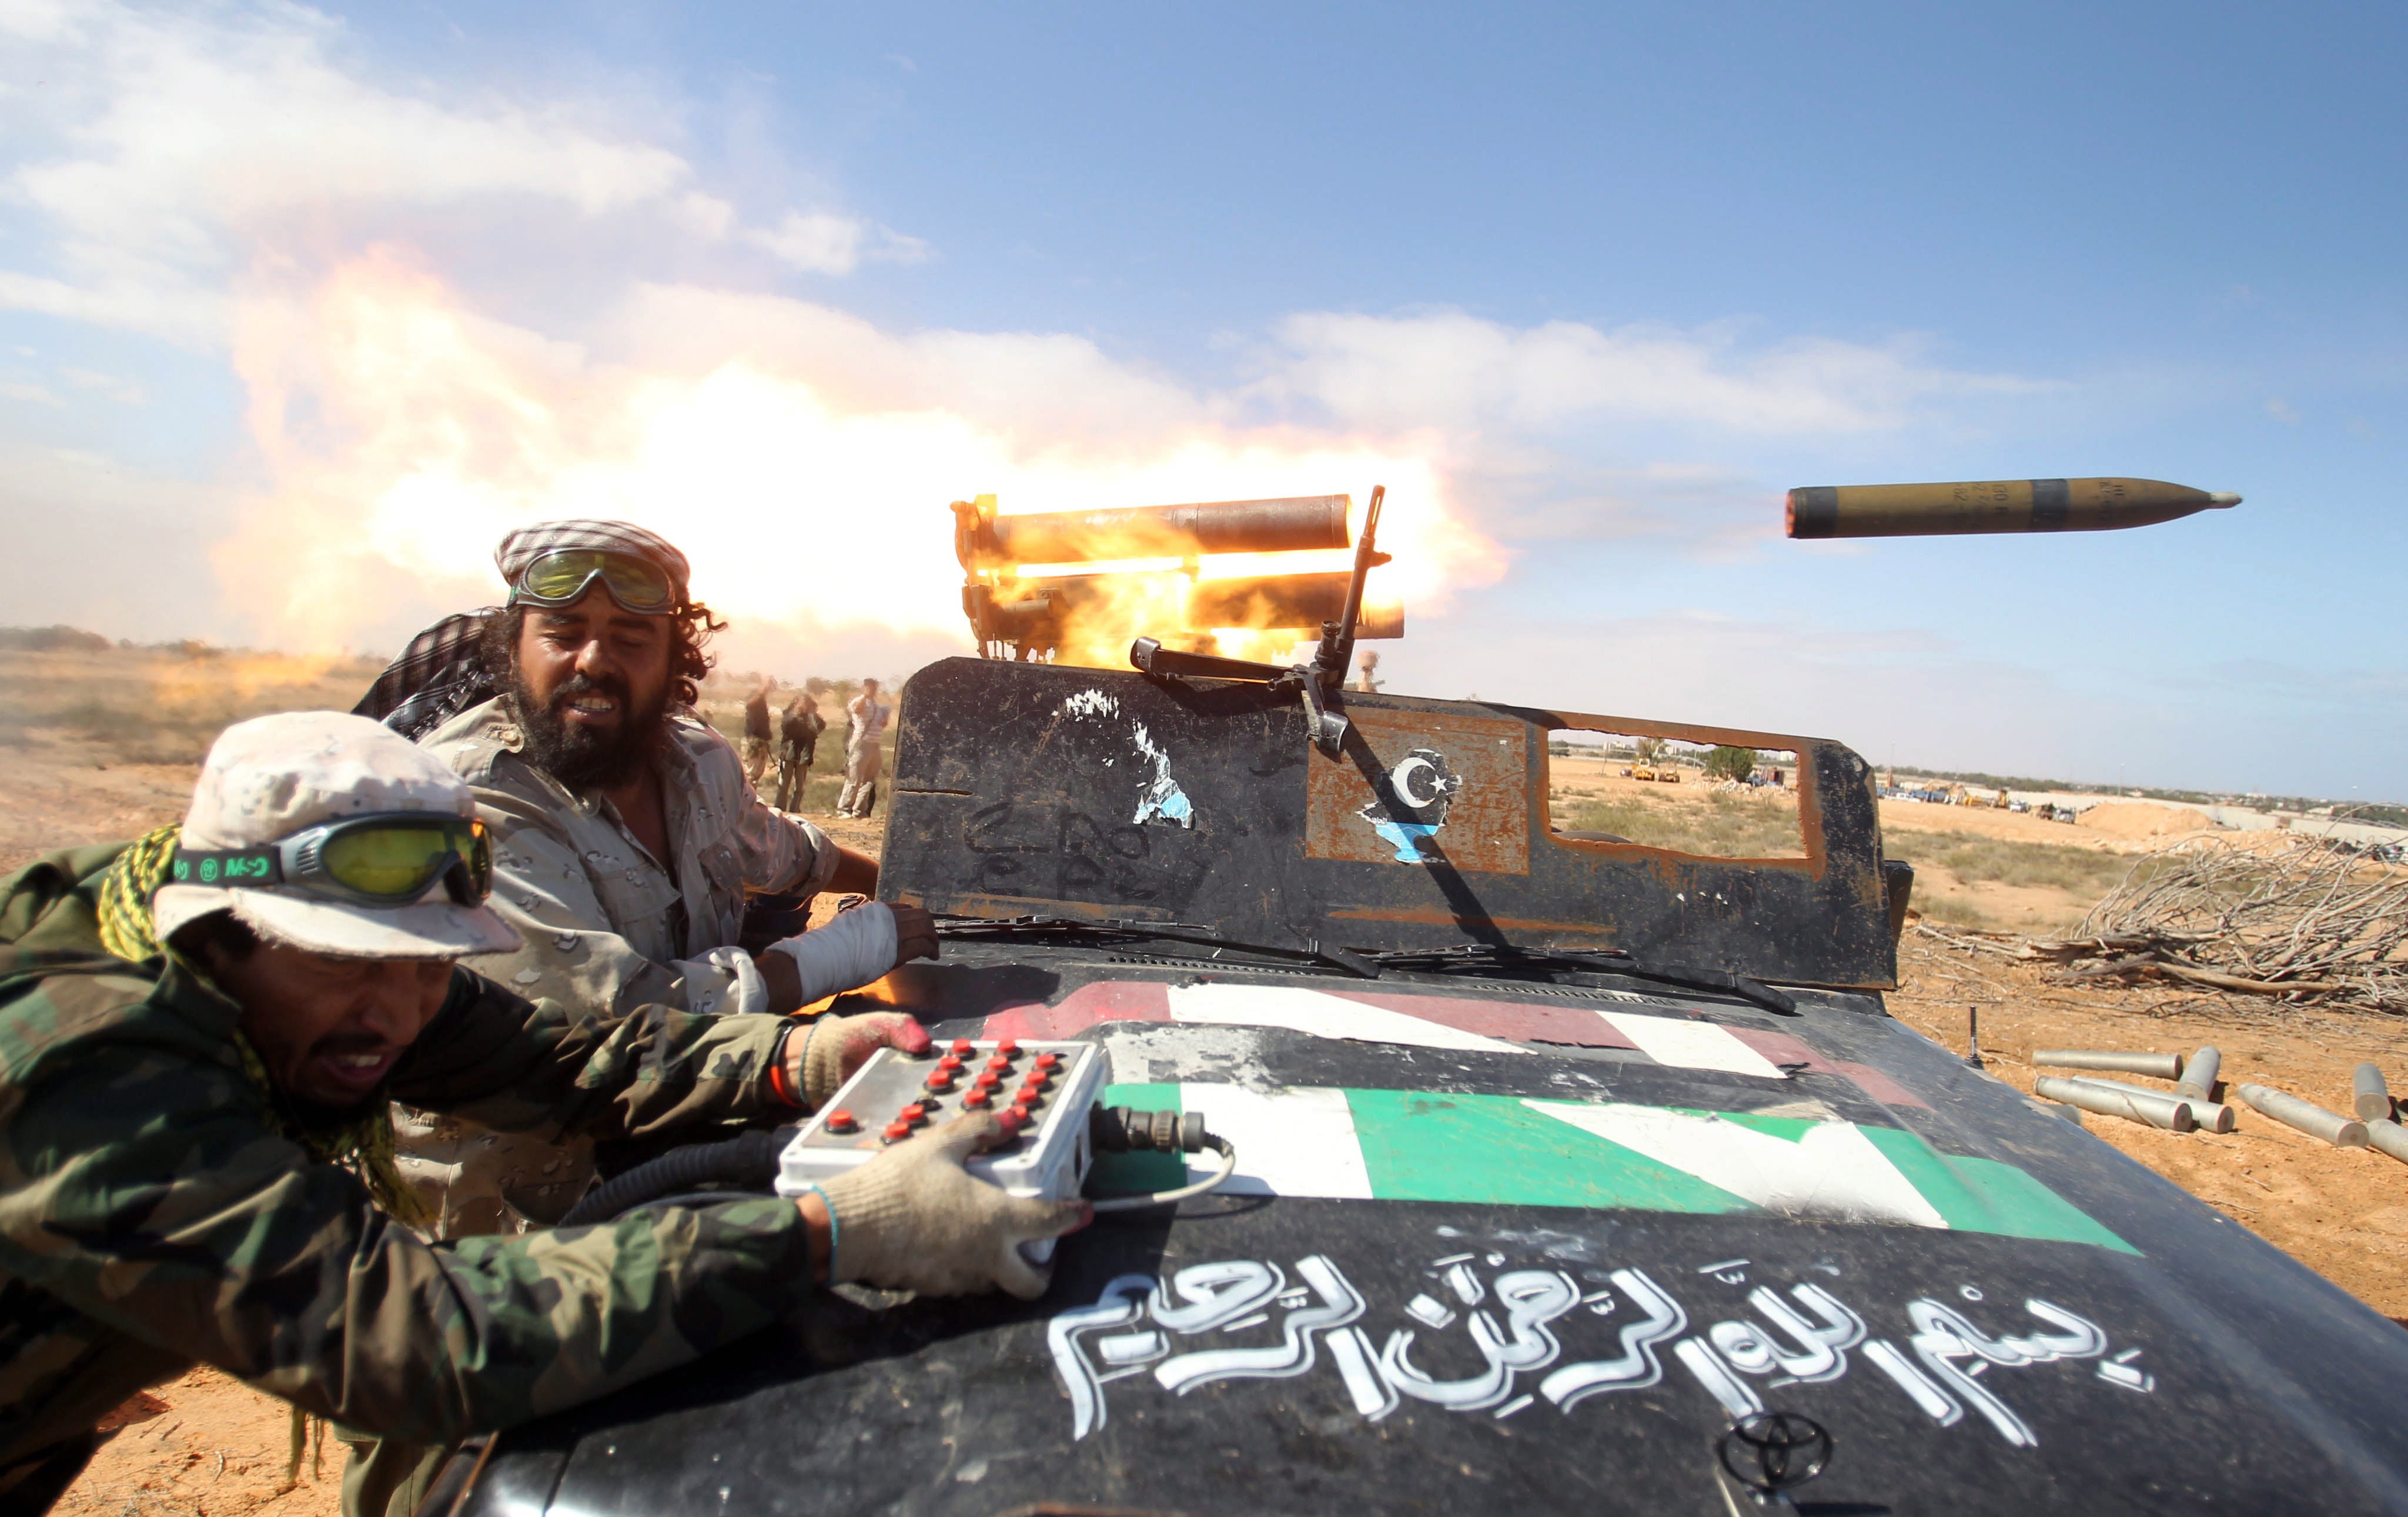 Libyan rebels fire a rocket as they enter the northern city of Sirte, 10 October 2011